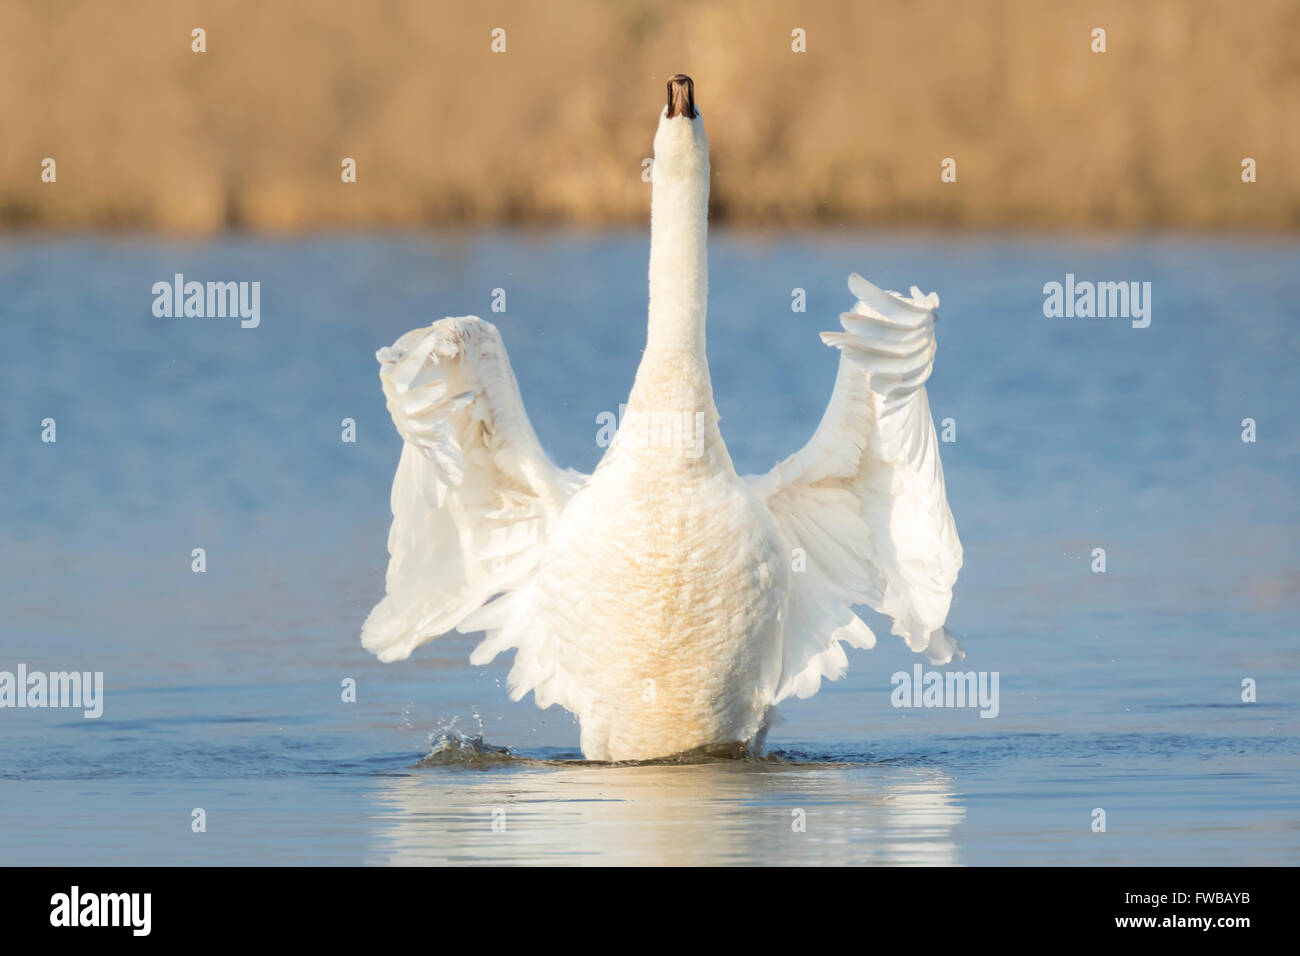 Mute swan, Cygnus olor, flapping wings to dry after preening on the water surface on a sunny day. Stock Photo